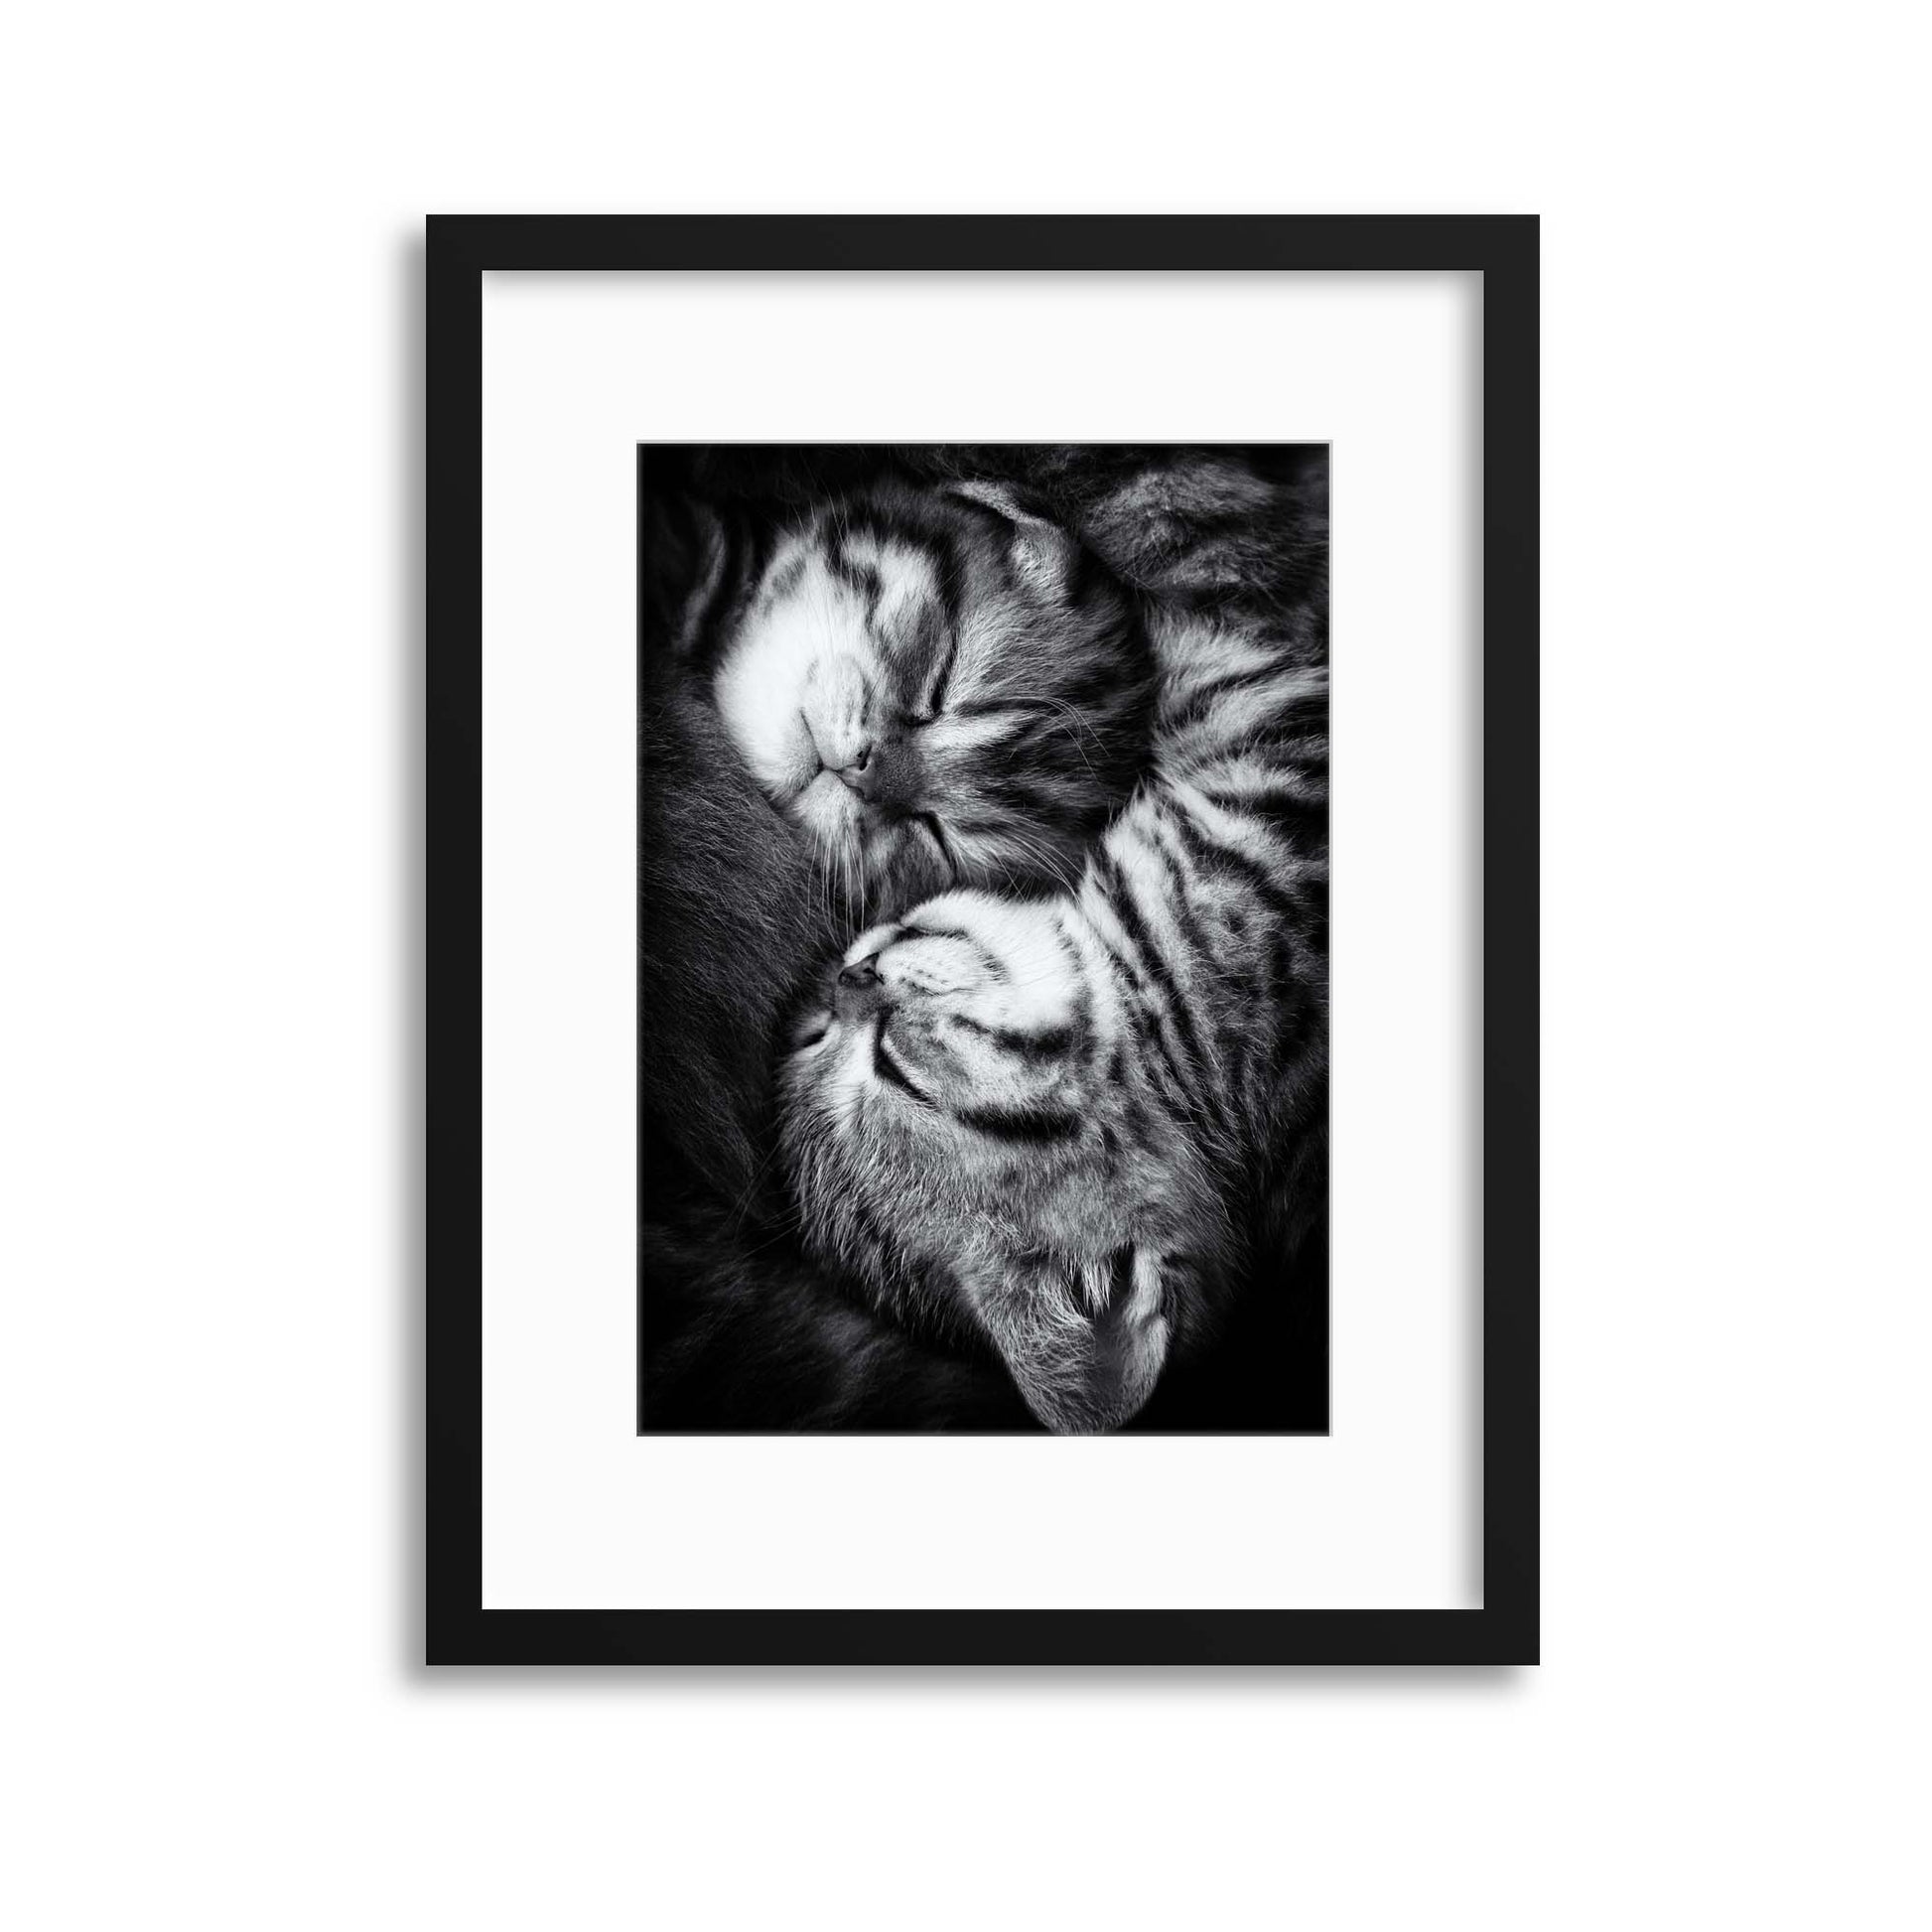 Yin and Yang by Andrea Jancova Framed Print - USTAD HOME